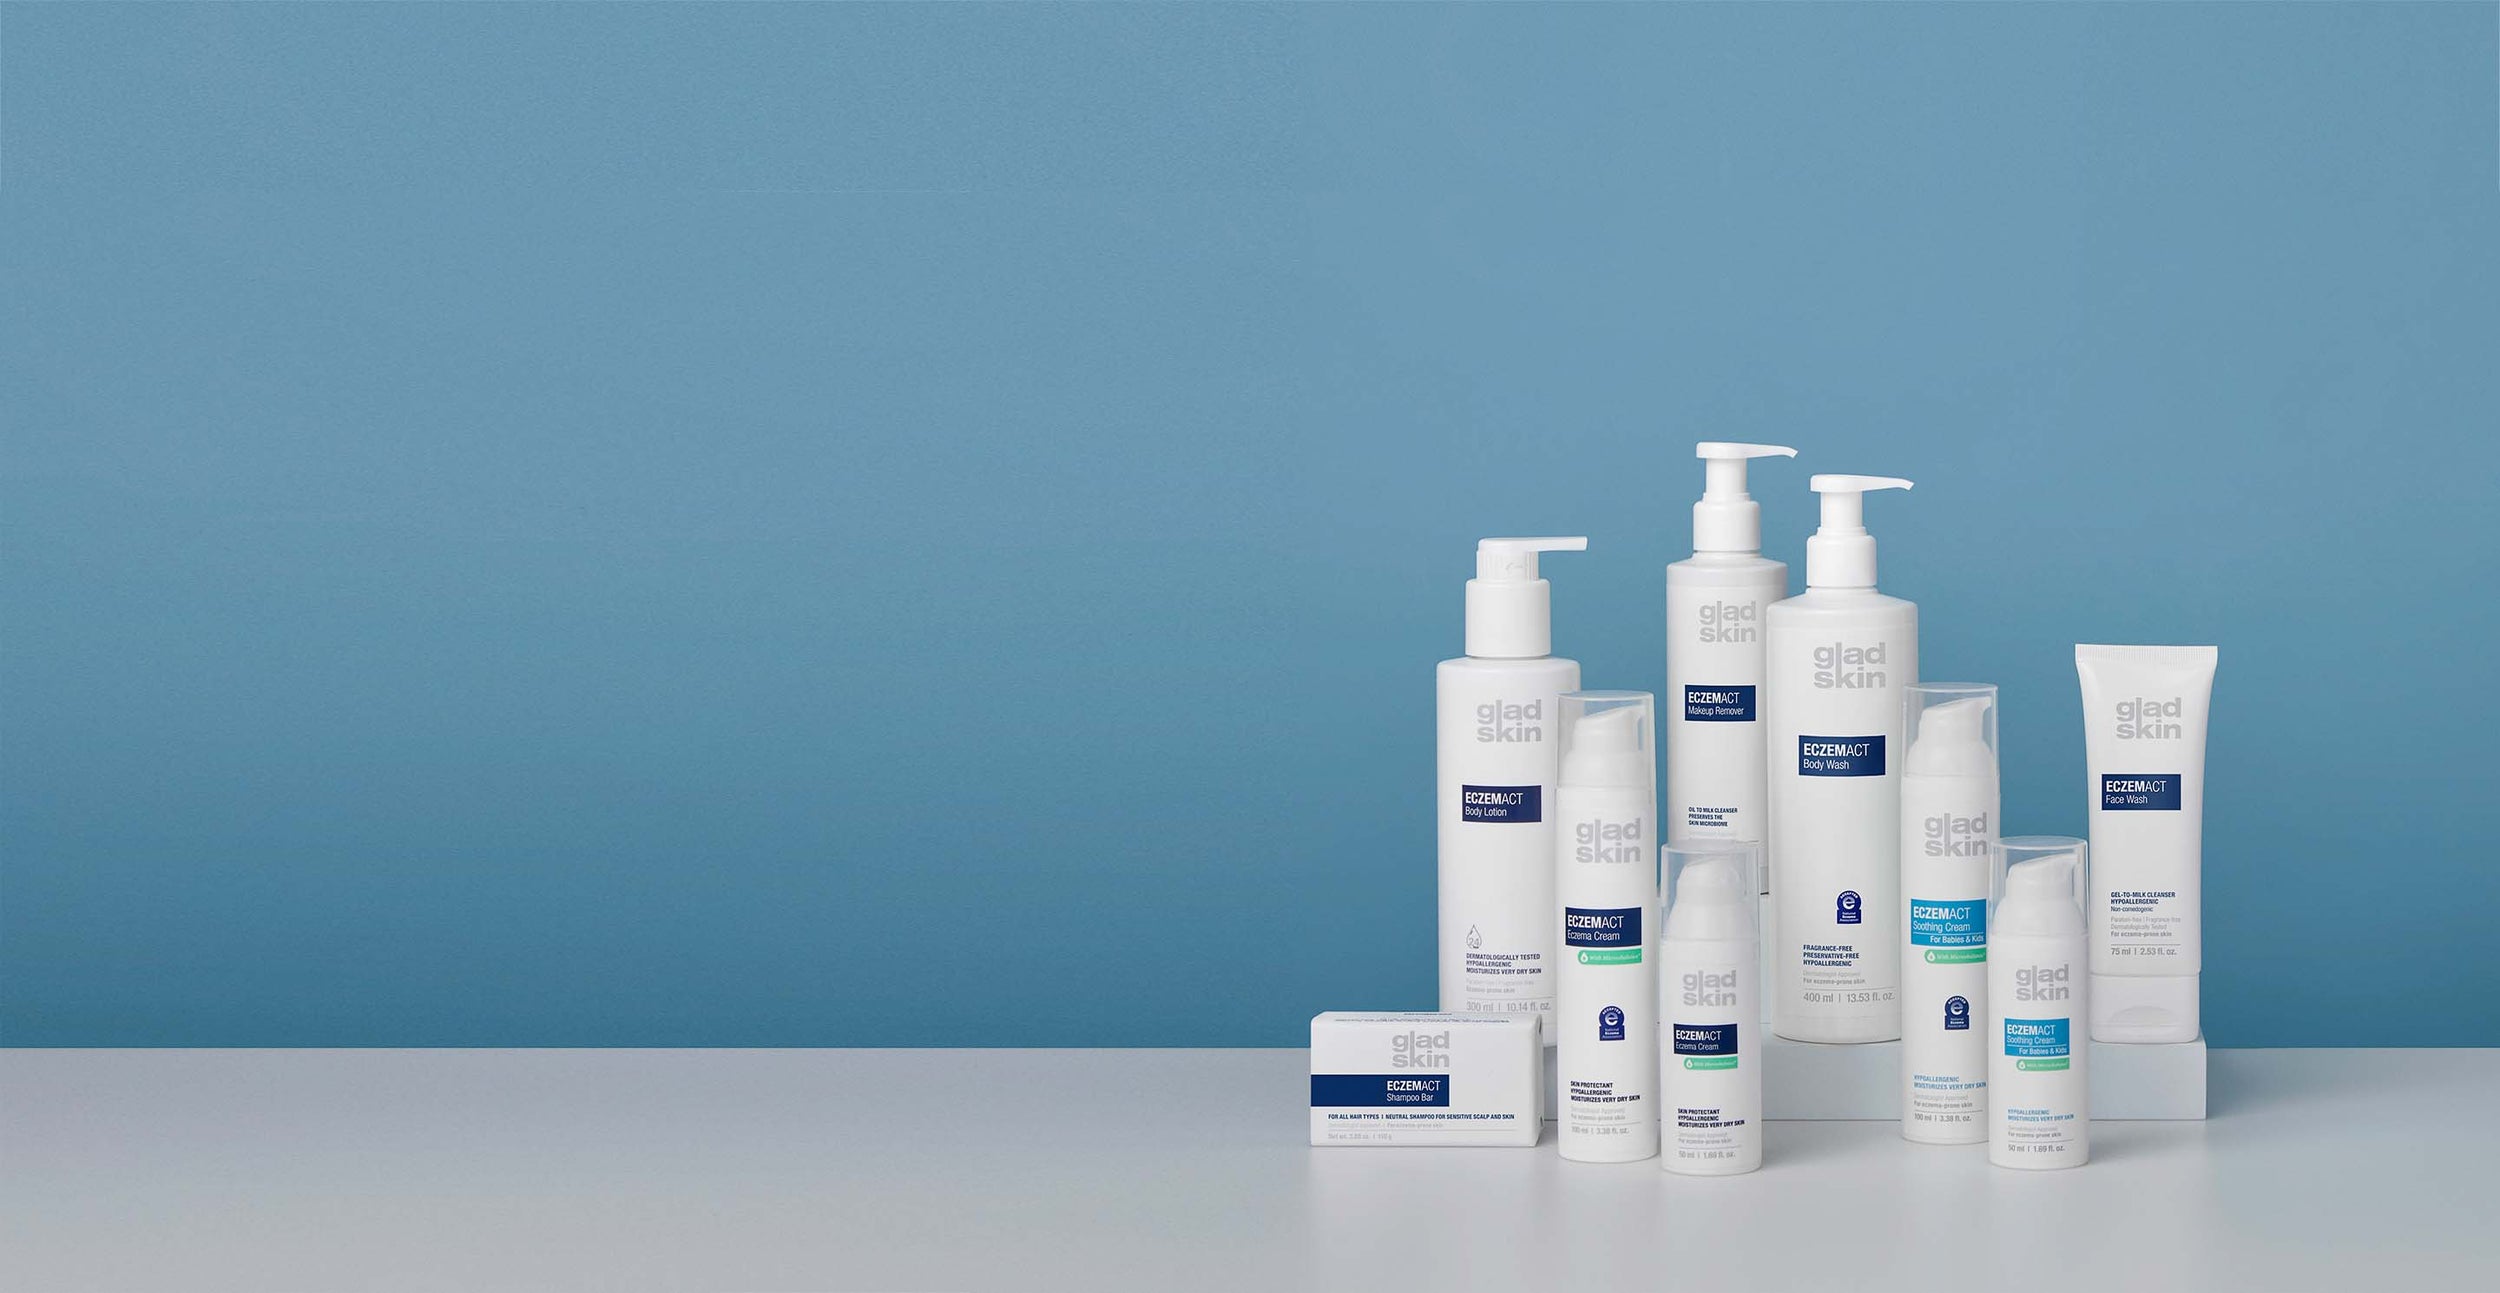 Gladskin Eczemact collection